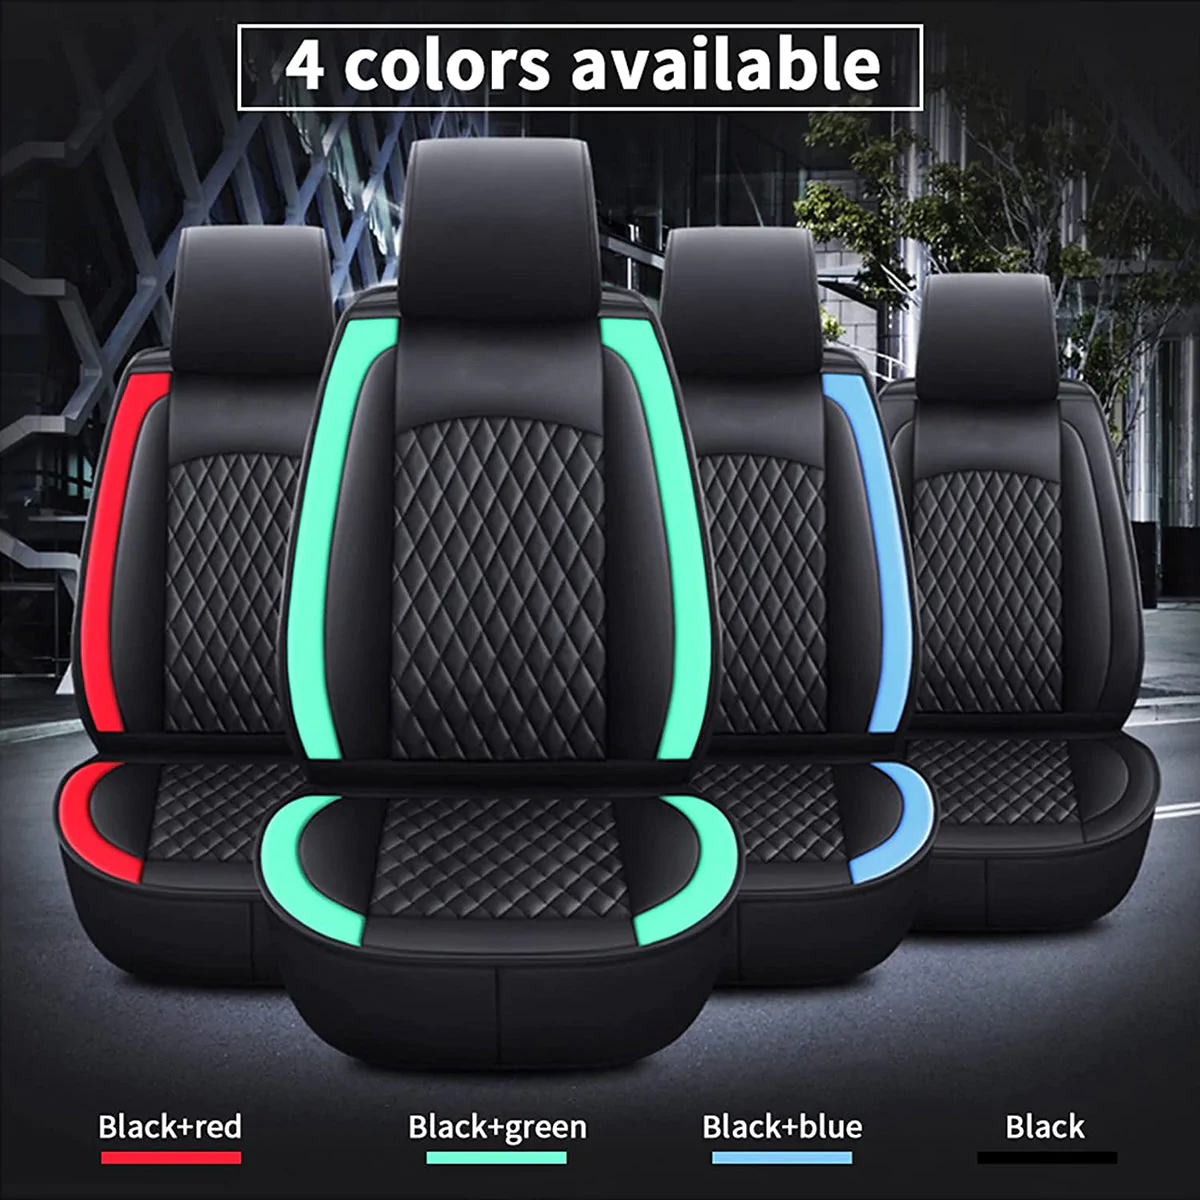 Custom Text For Seat Covers 5 Seats Full Set, Custom Fit For Your Cars, Leatherette Automotive Seat Cushion Protector Universal Fit, Vehicle Auto Interior Decor SA13988